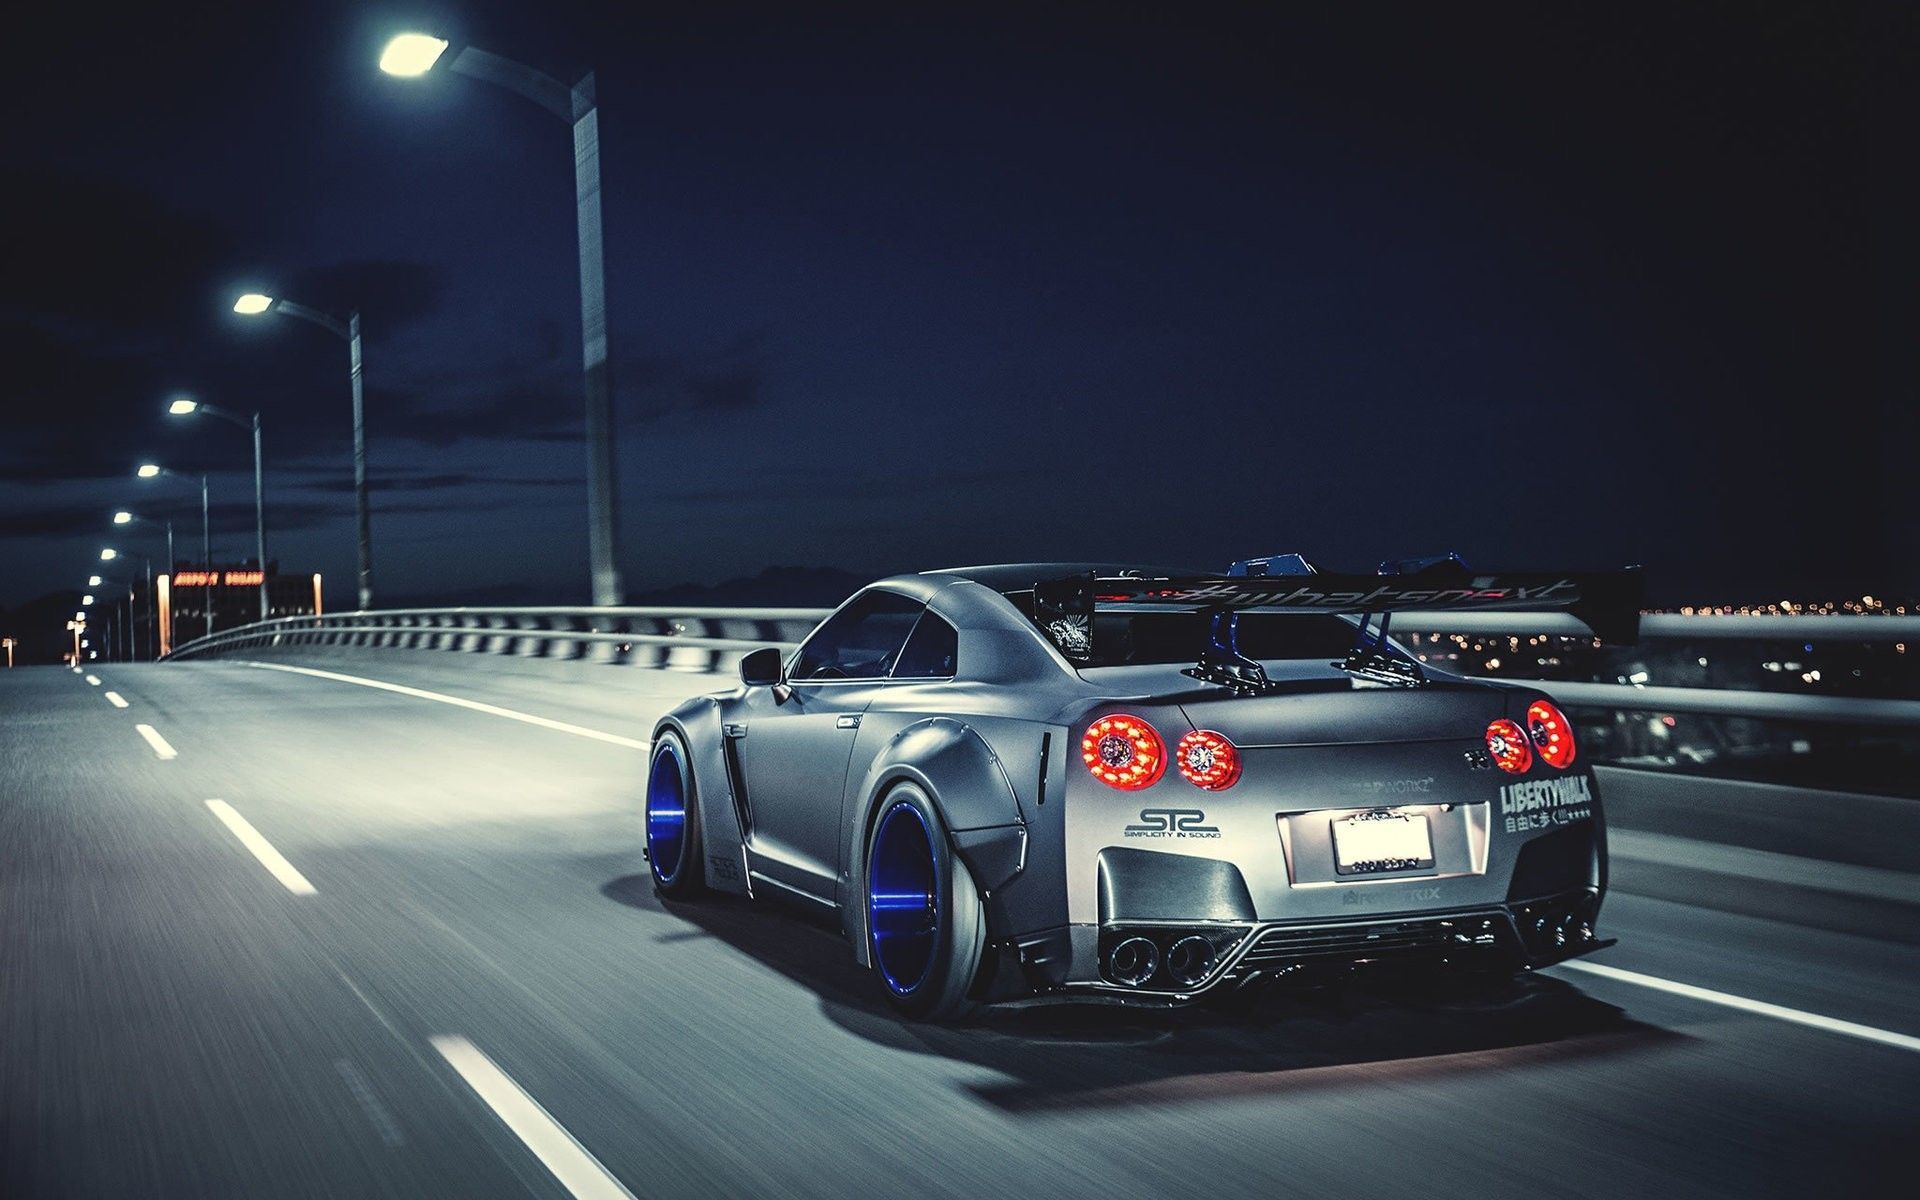 Nissan Gtr Modified Wallpapers Wallpaper Cave